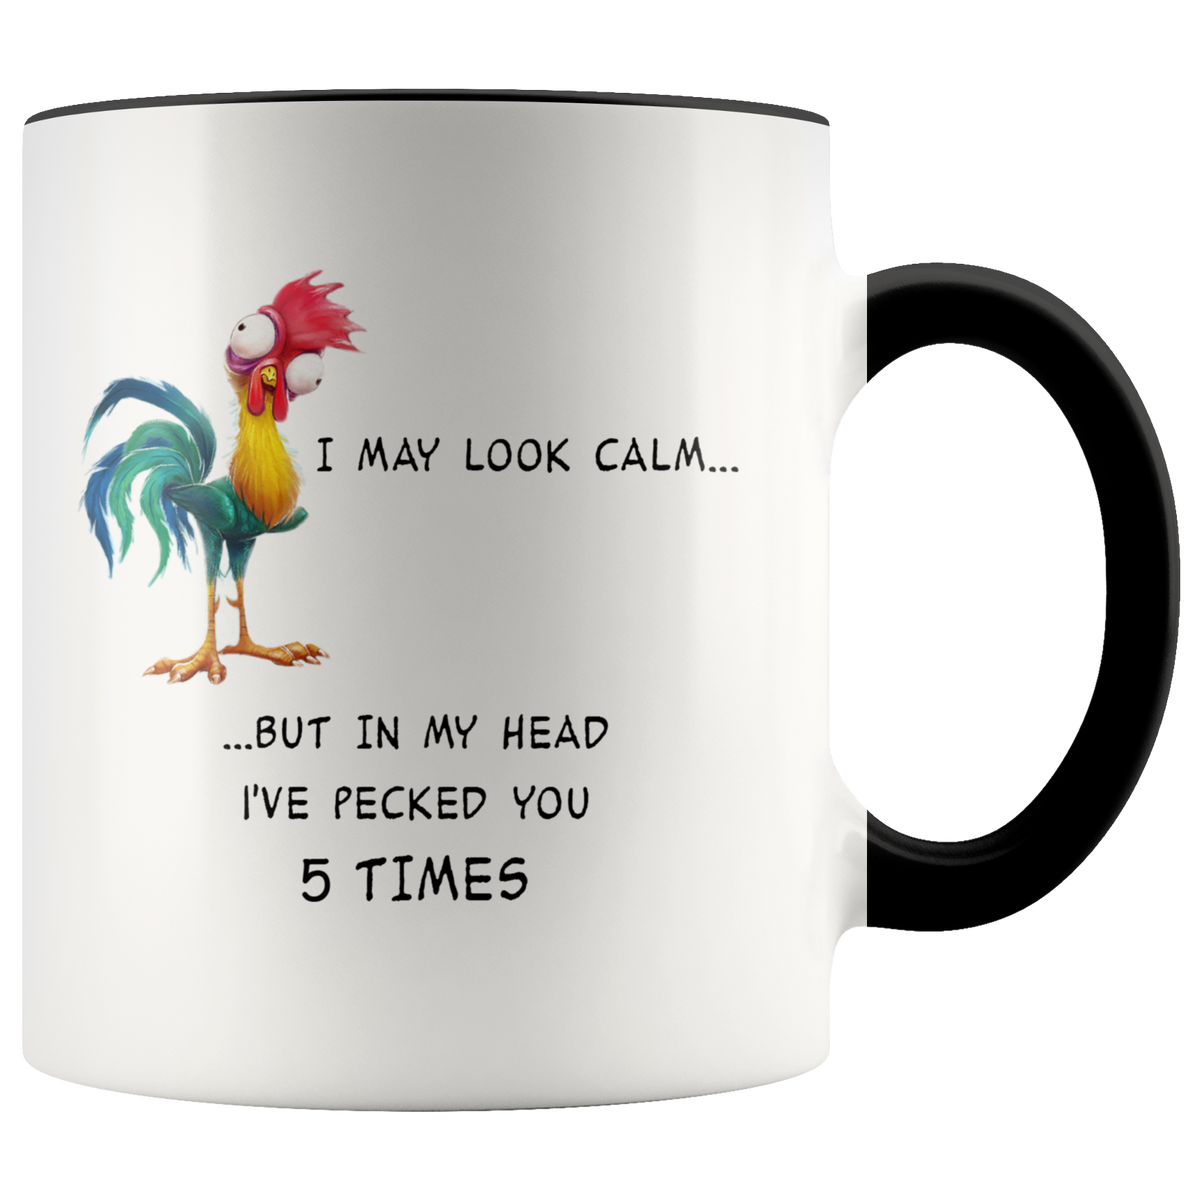 Funny Coffee Mug For Office Work Friends, Coworkers, Boss - I May Look Calm But In My Head I've Pecked You 5 Times